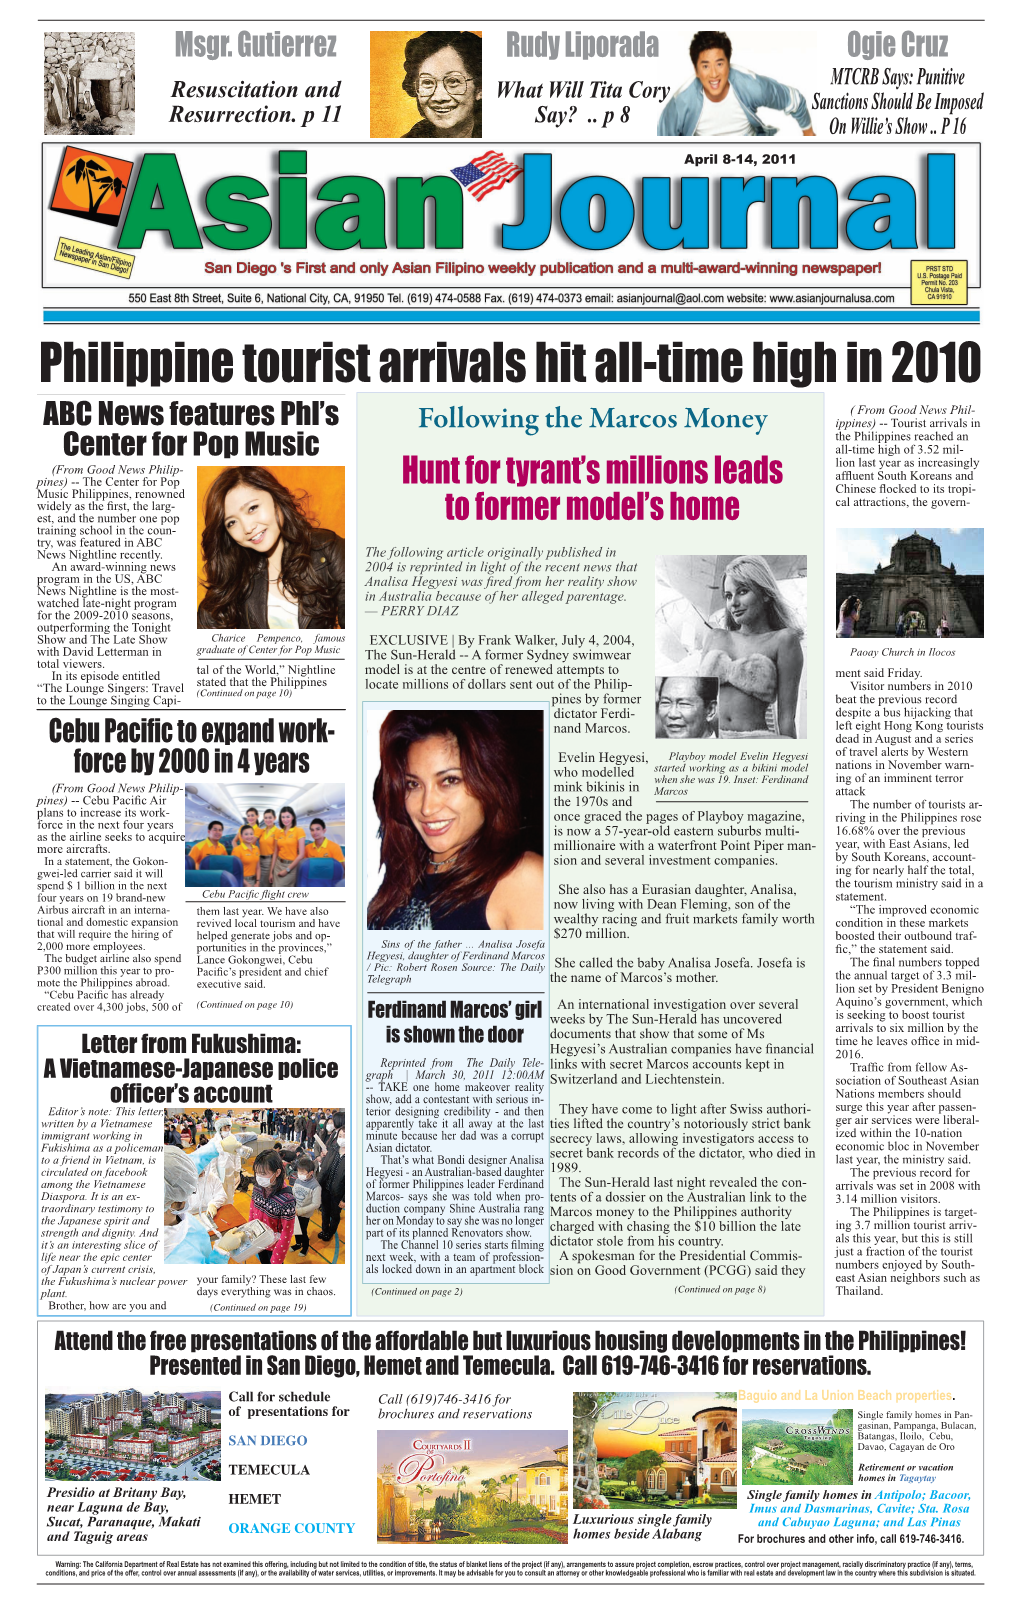 Philippine Tourist Arrivals Hit All-Time High in 2010